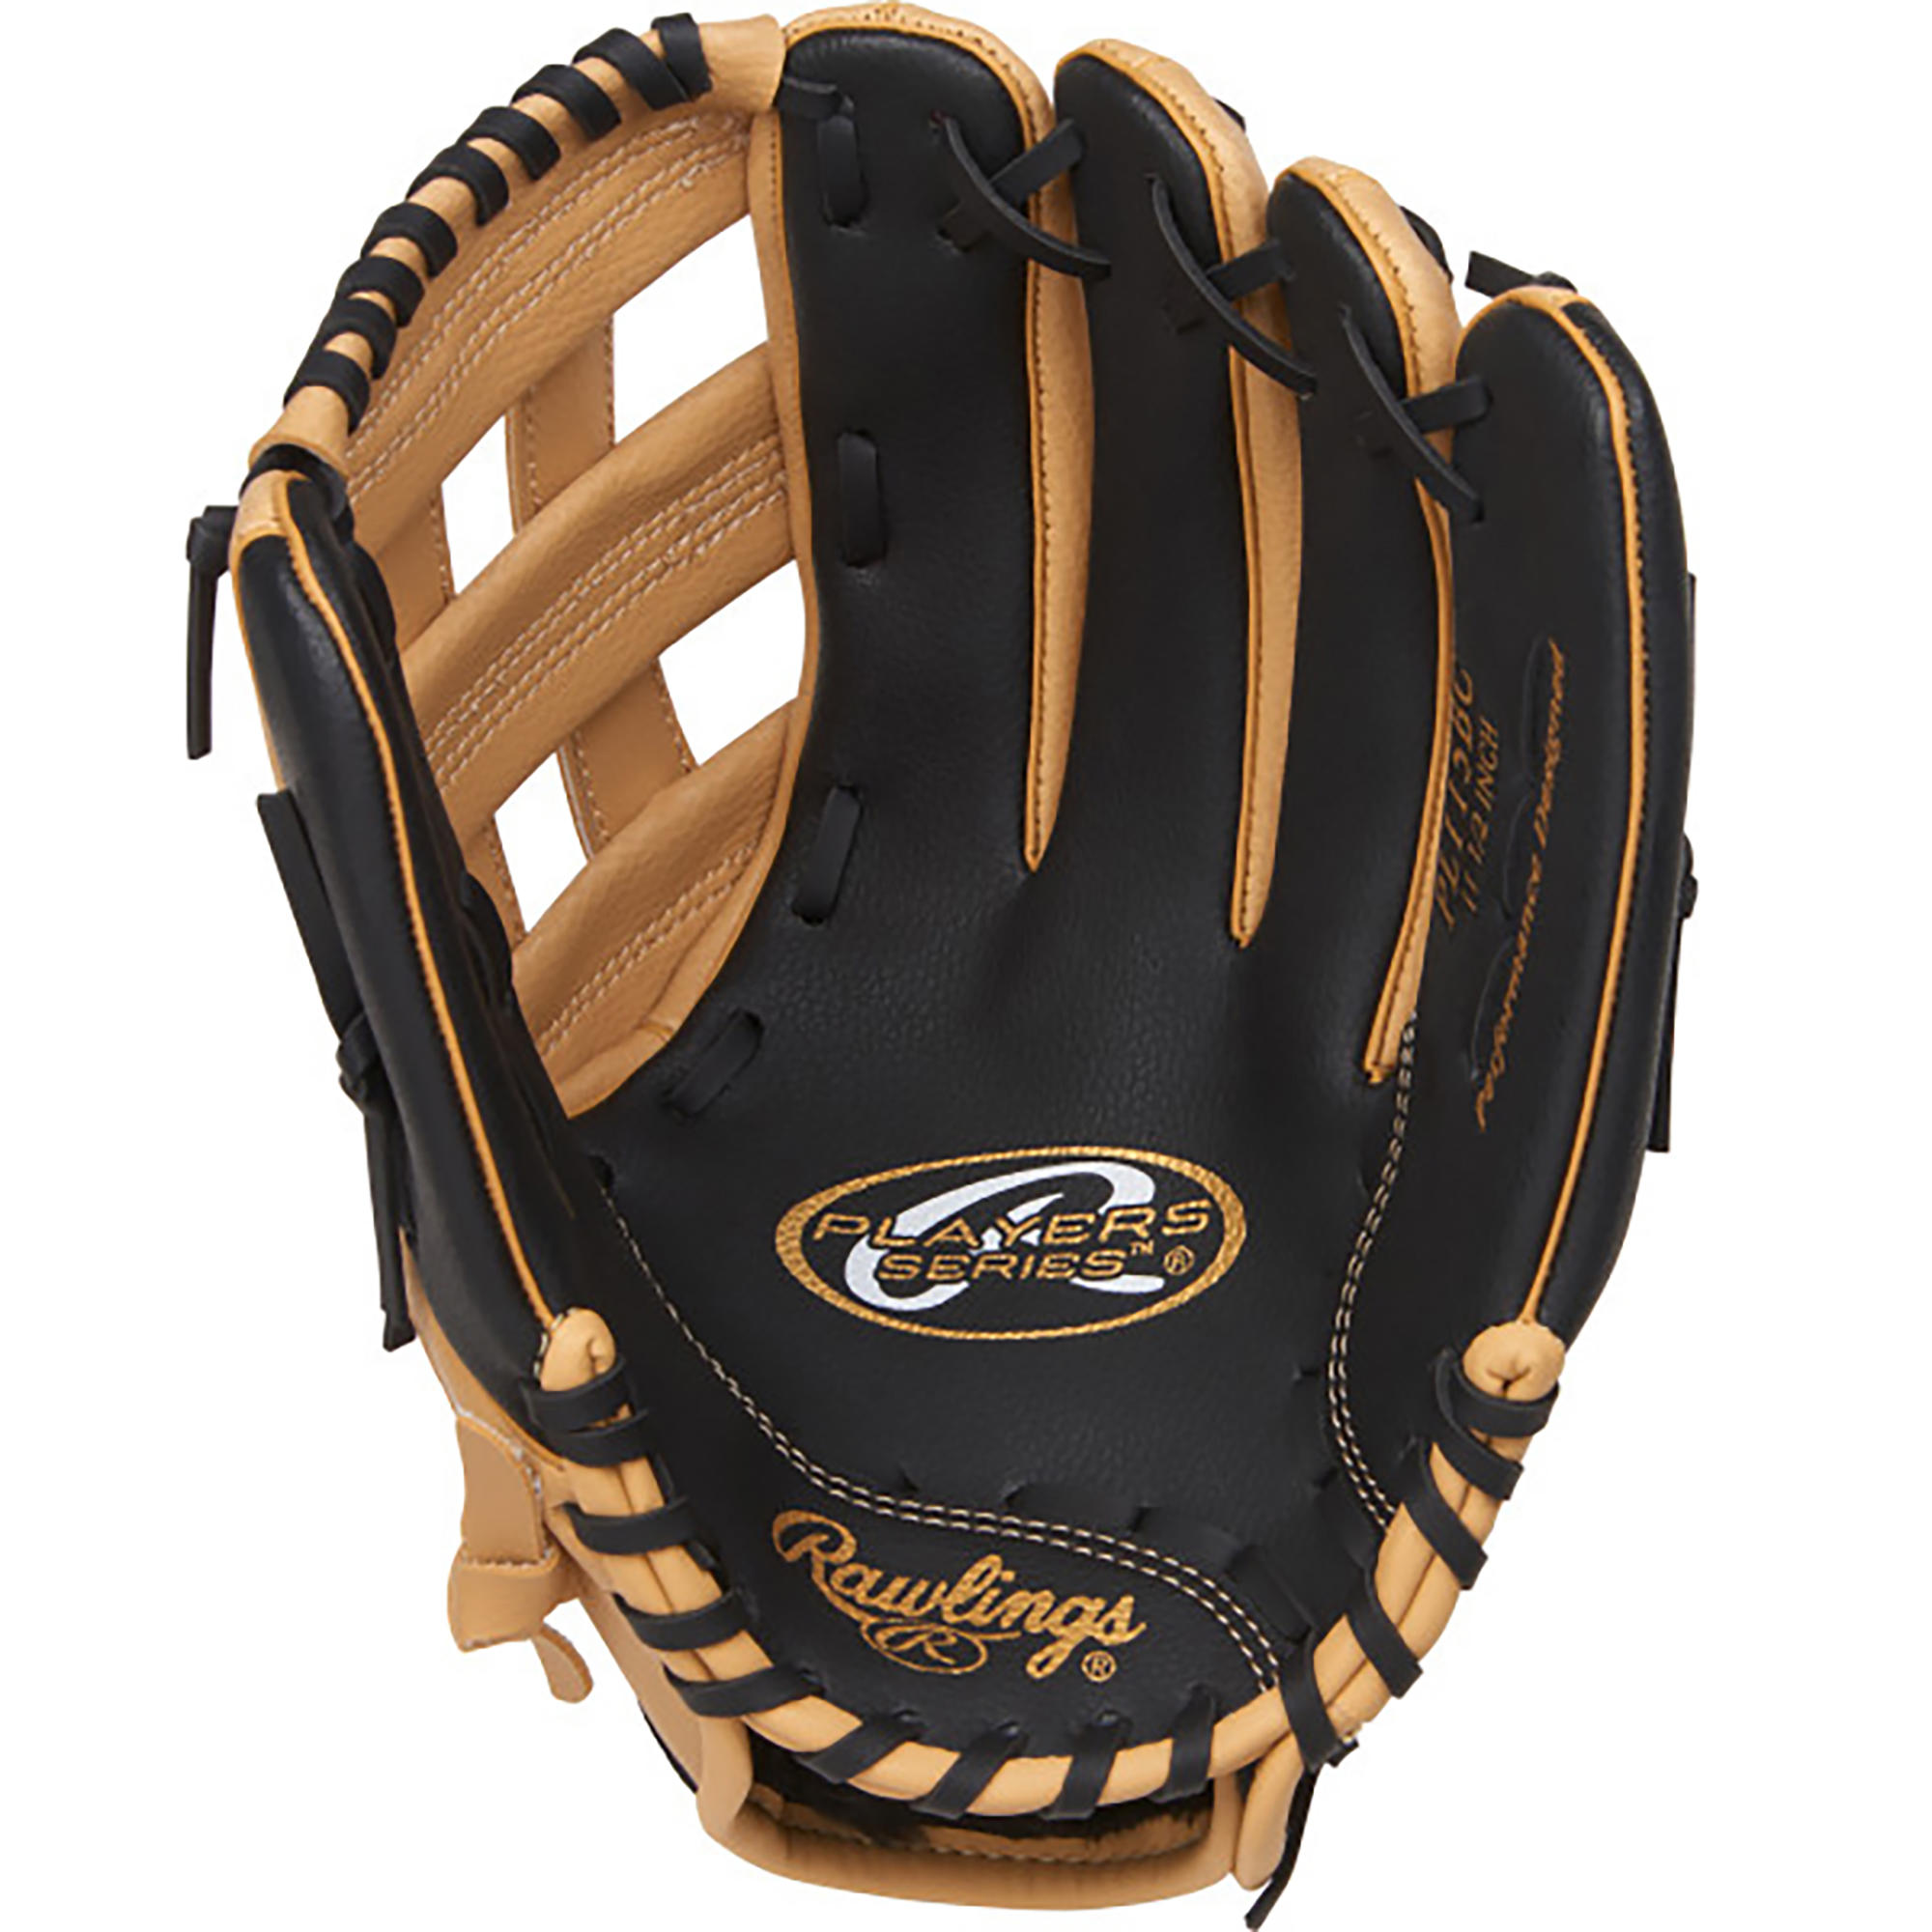 11.5" Right-Hand Glove - Player's Series